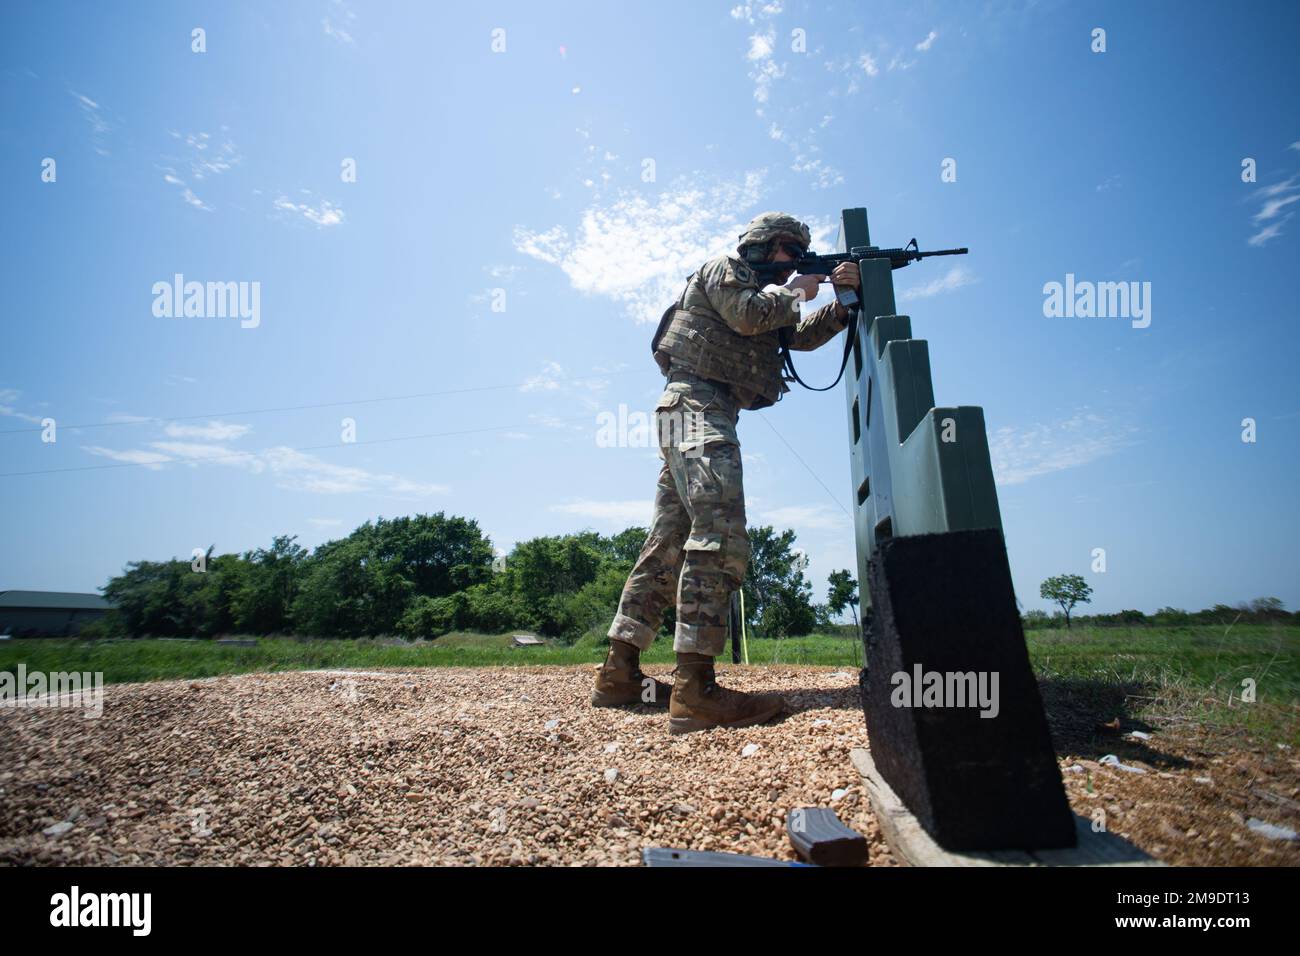 Staff Sgt. Joseph Dunn, an Arkansas National Guard Soldier, fires an M4 during a weapons skills challenge at the National Guard Region V Best Warrior Competition, Camp Gruber Training Center, Okla., May 18, 2022. The annual competition brings together top-tier soldiers to challenge them on a variety of Army warrior tasks. (Oklahoma National Guard photo by Spc. Danielle Rayon) Stock Photo